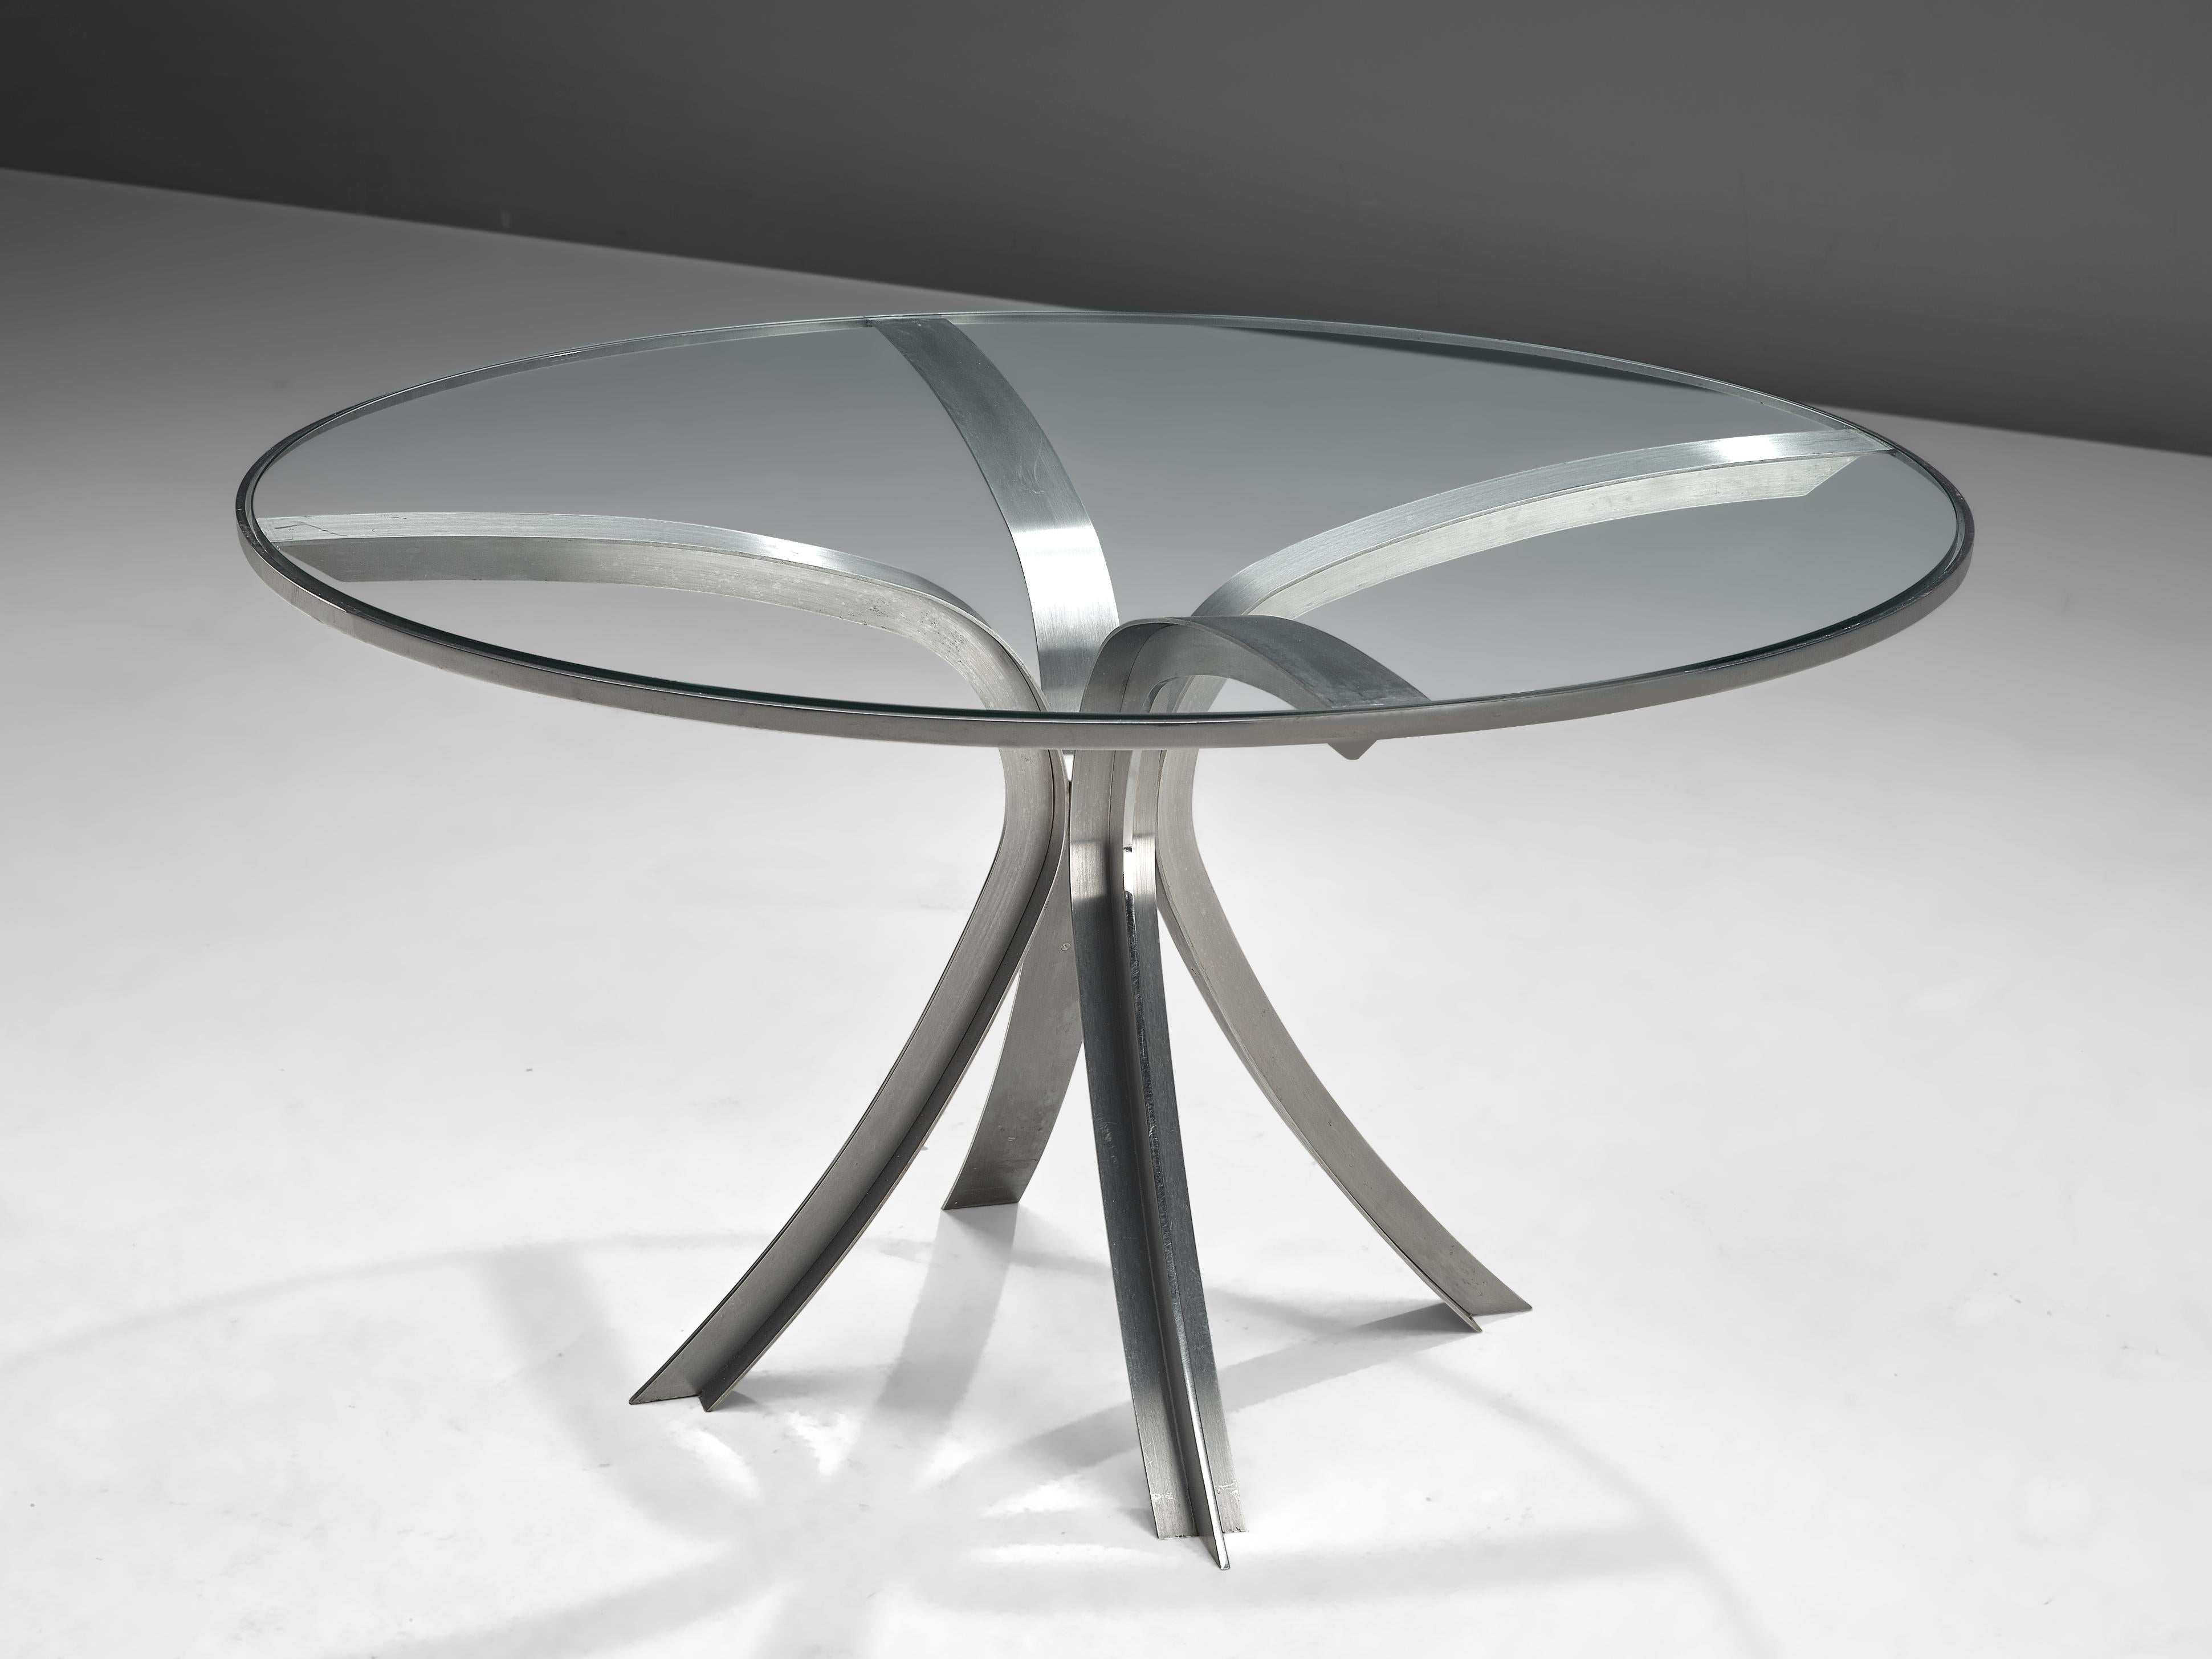 Centre table, in glass and stainless steel, France, 1970s. 

This table from the 1970s is manufactured by the Frenchman Xavier Féal. Overal, Féal's pieces are known for their excellent artisanship and durable material. Although this dining table